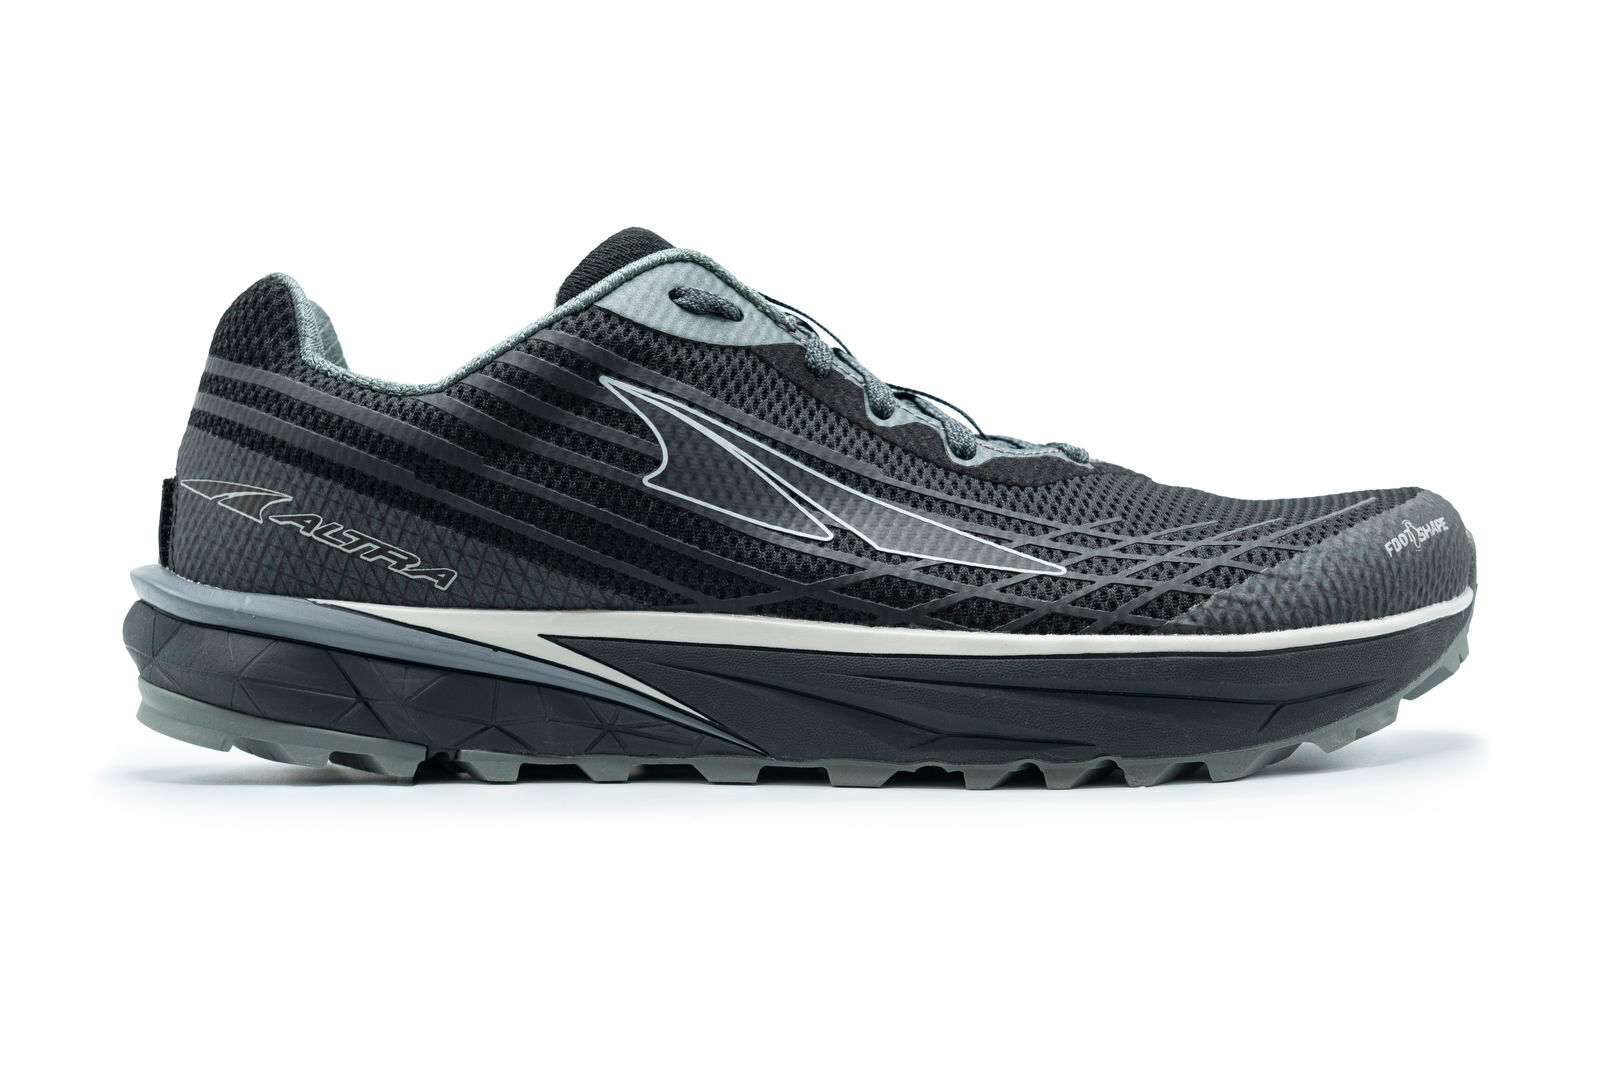 Altra Timp 2 - Trail running shoes - Men's